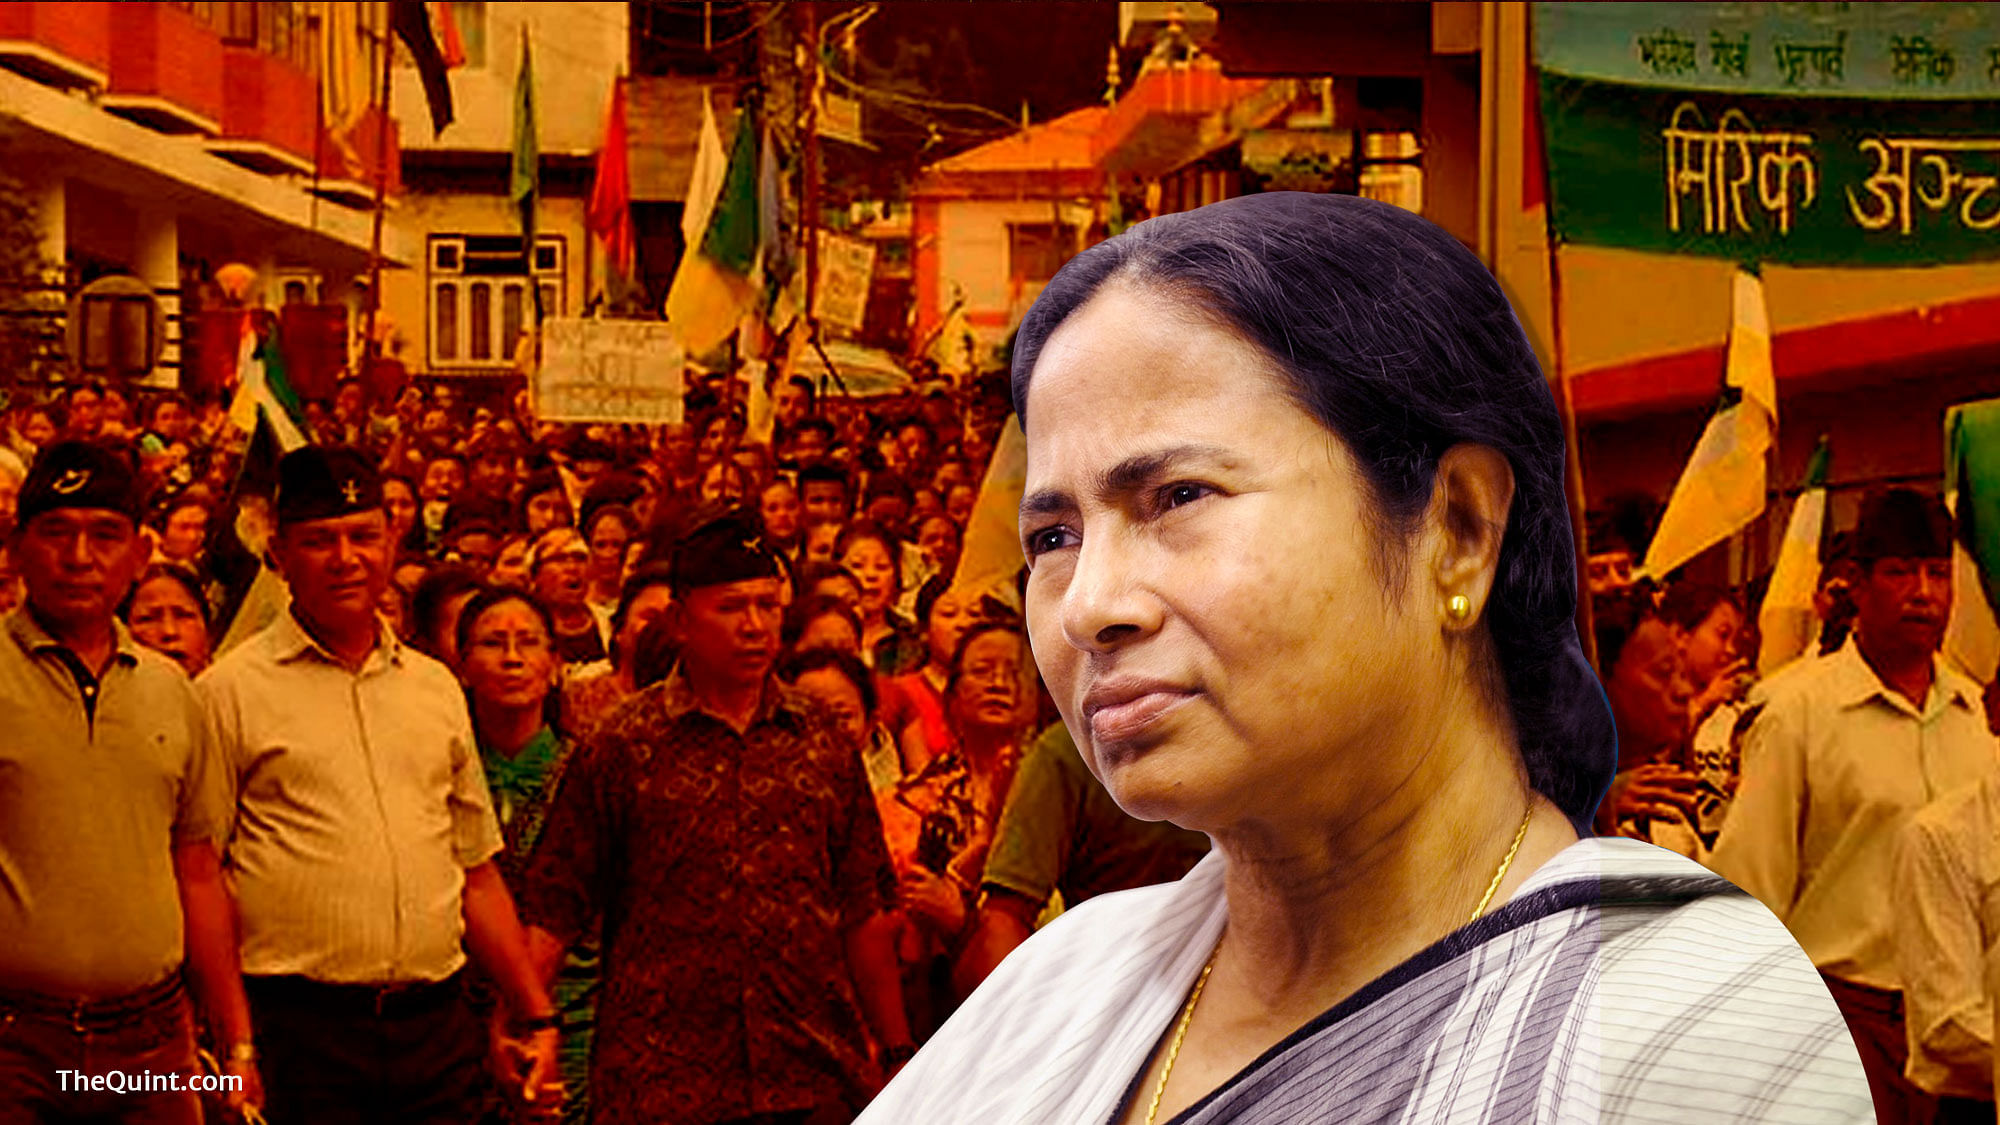 The Gorkha Janmukti Morcha’s cry for Gorkhaland has become West Bengal Chief Minister Mamata Banerjee’s toughest challenge in her six-year-rule. (Photo: Liju Joseph/<b>The Quint</b>)